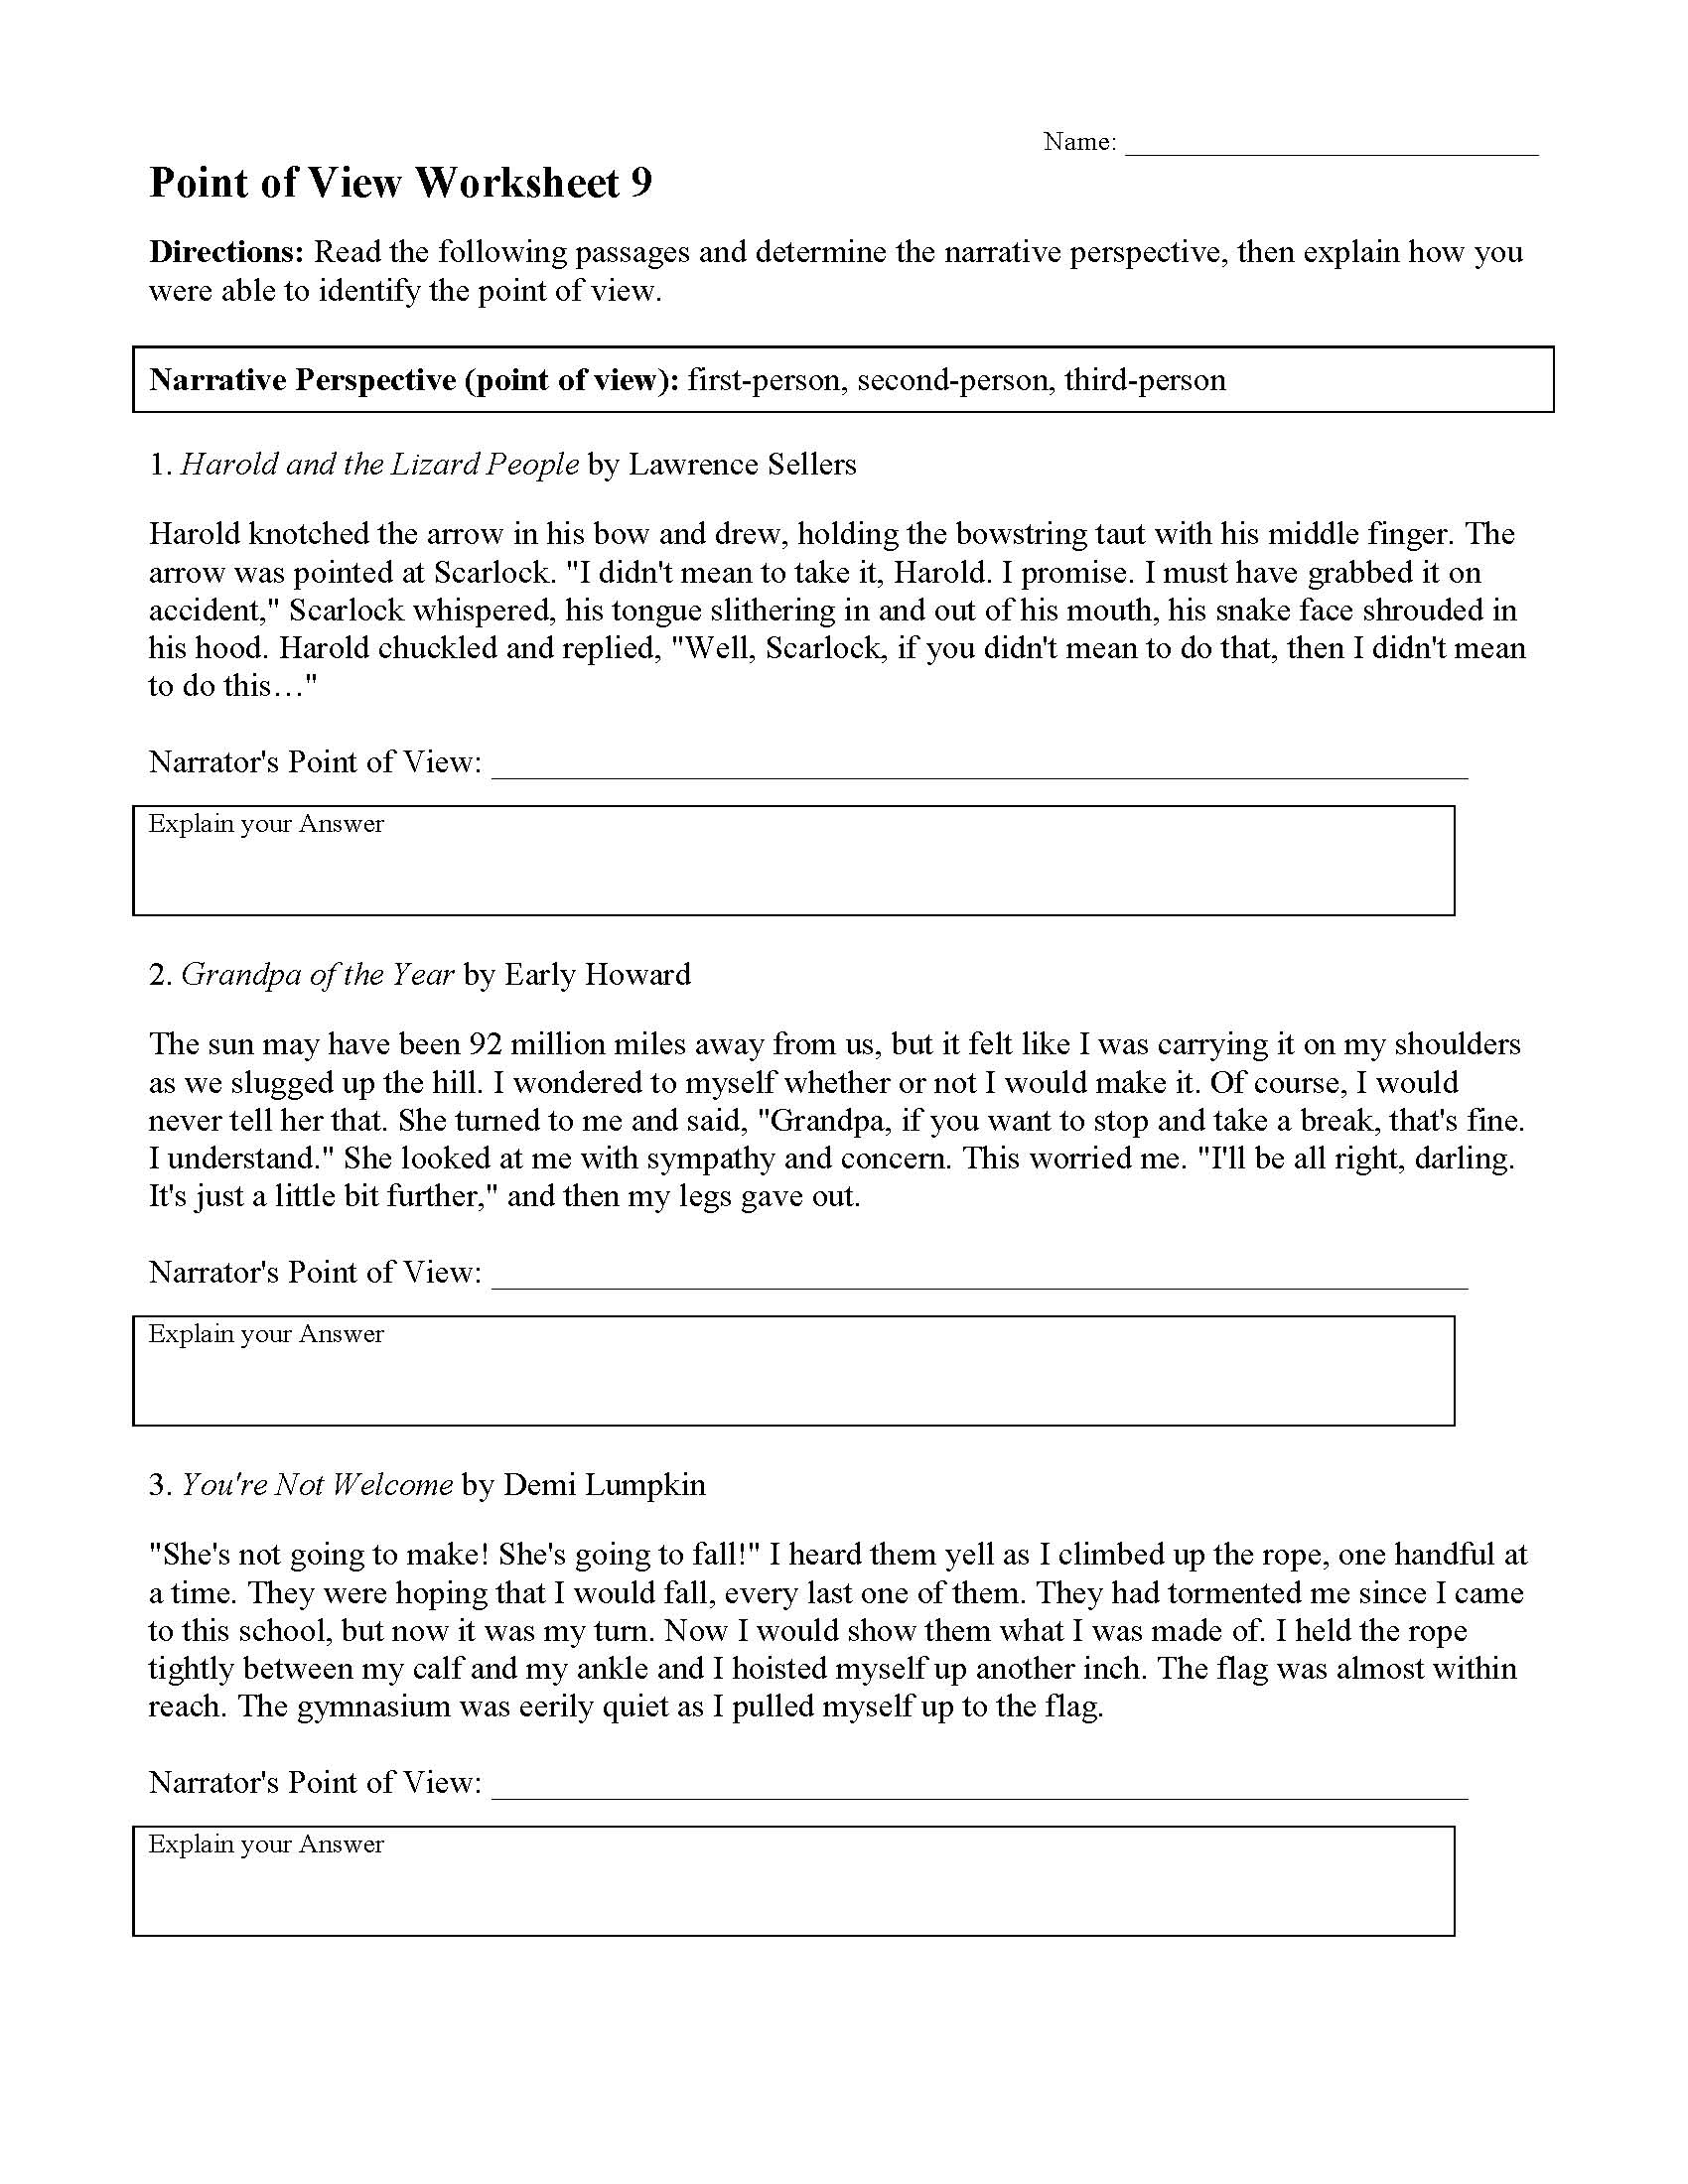 point-of-view-worksheet-9-reading-activity